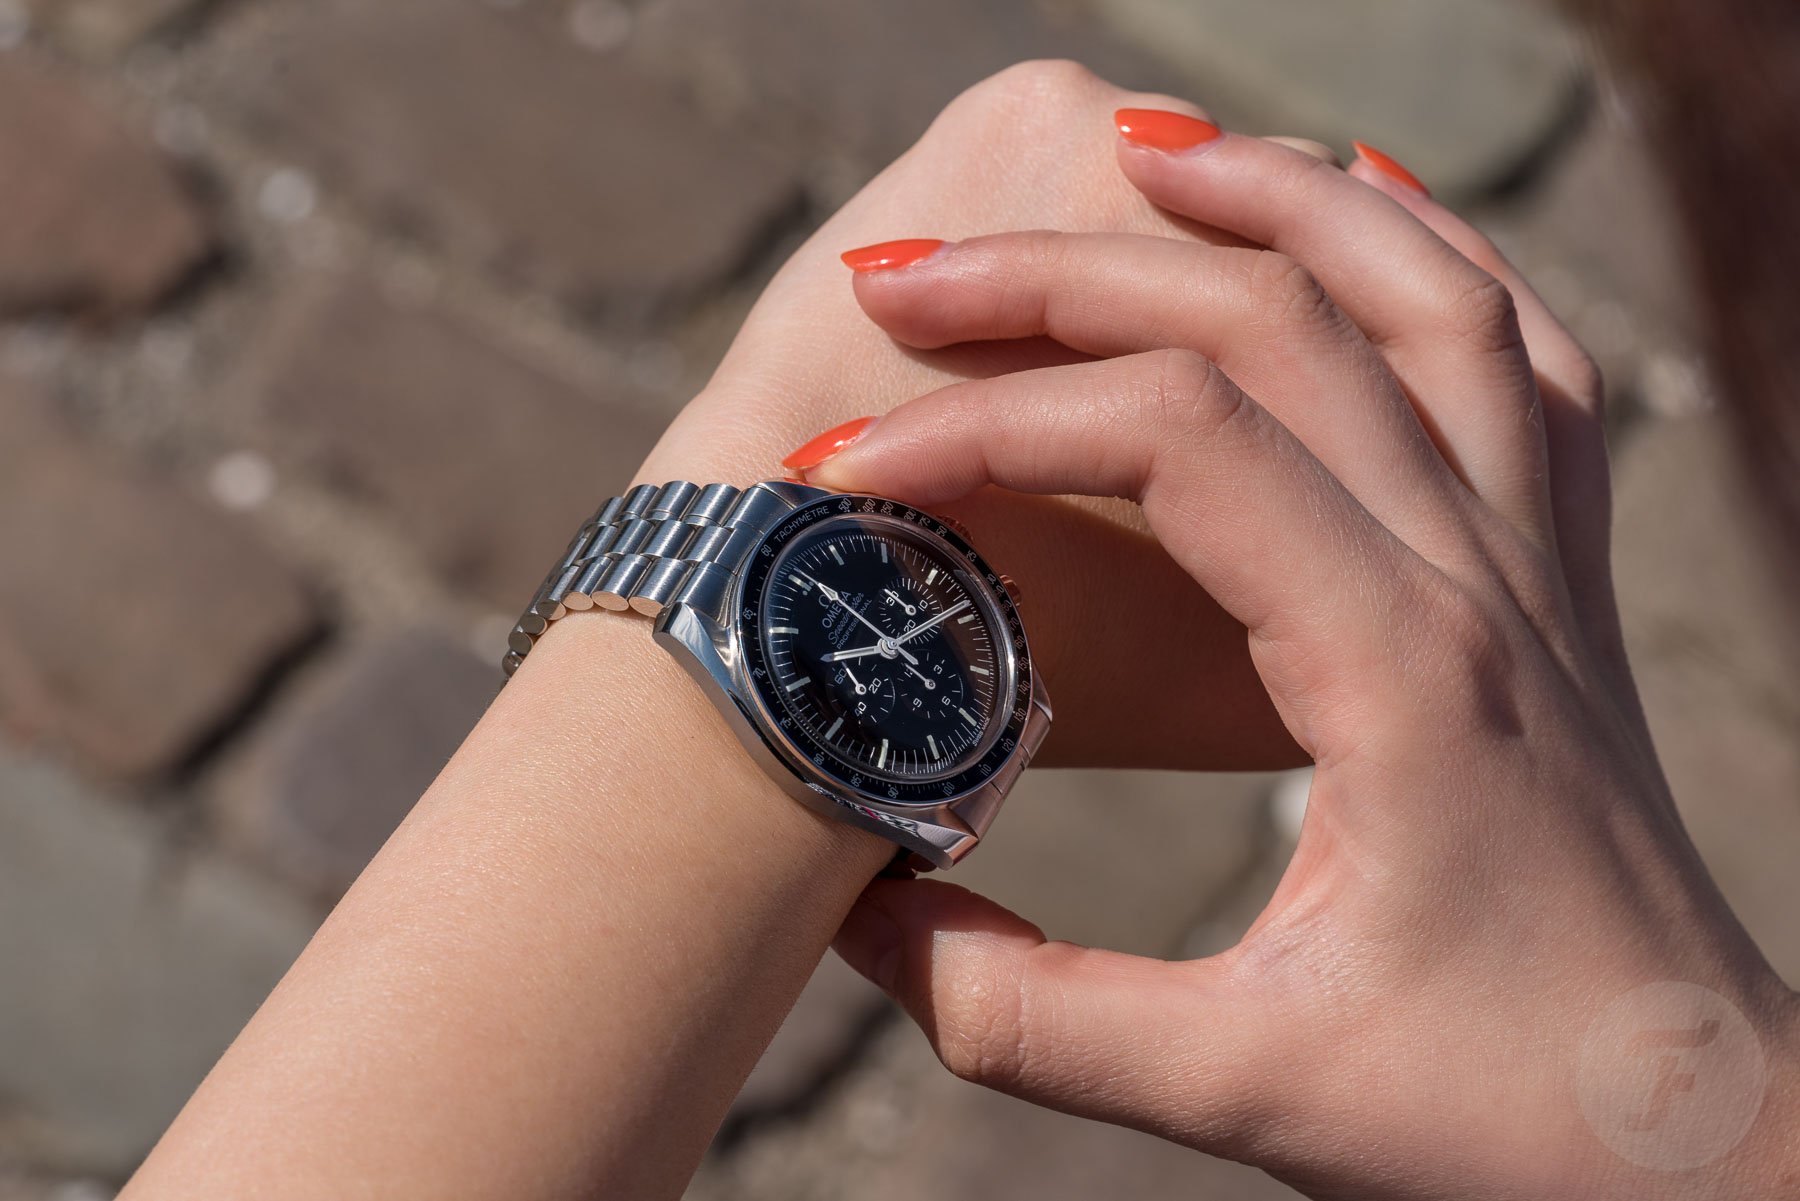 Omega Raises Luxury Watch Prices as Other Swatch Brands Struggle